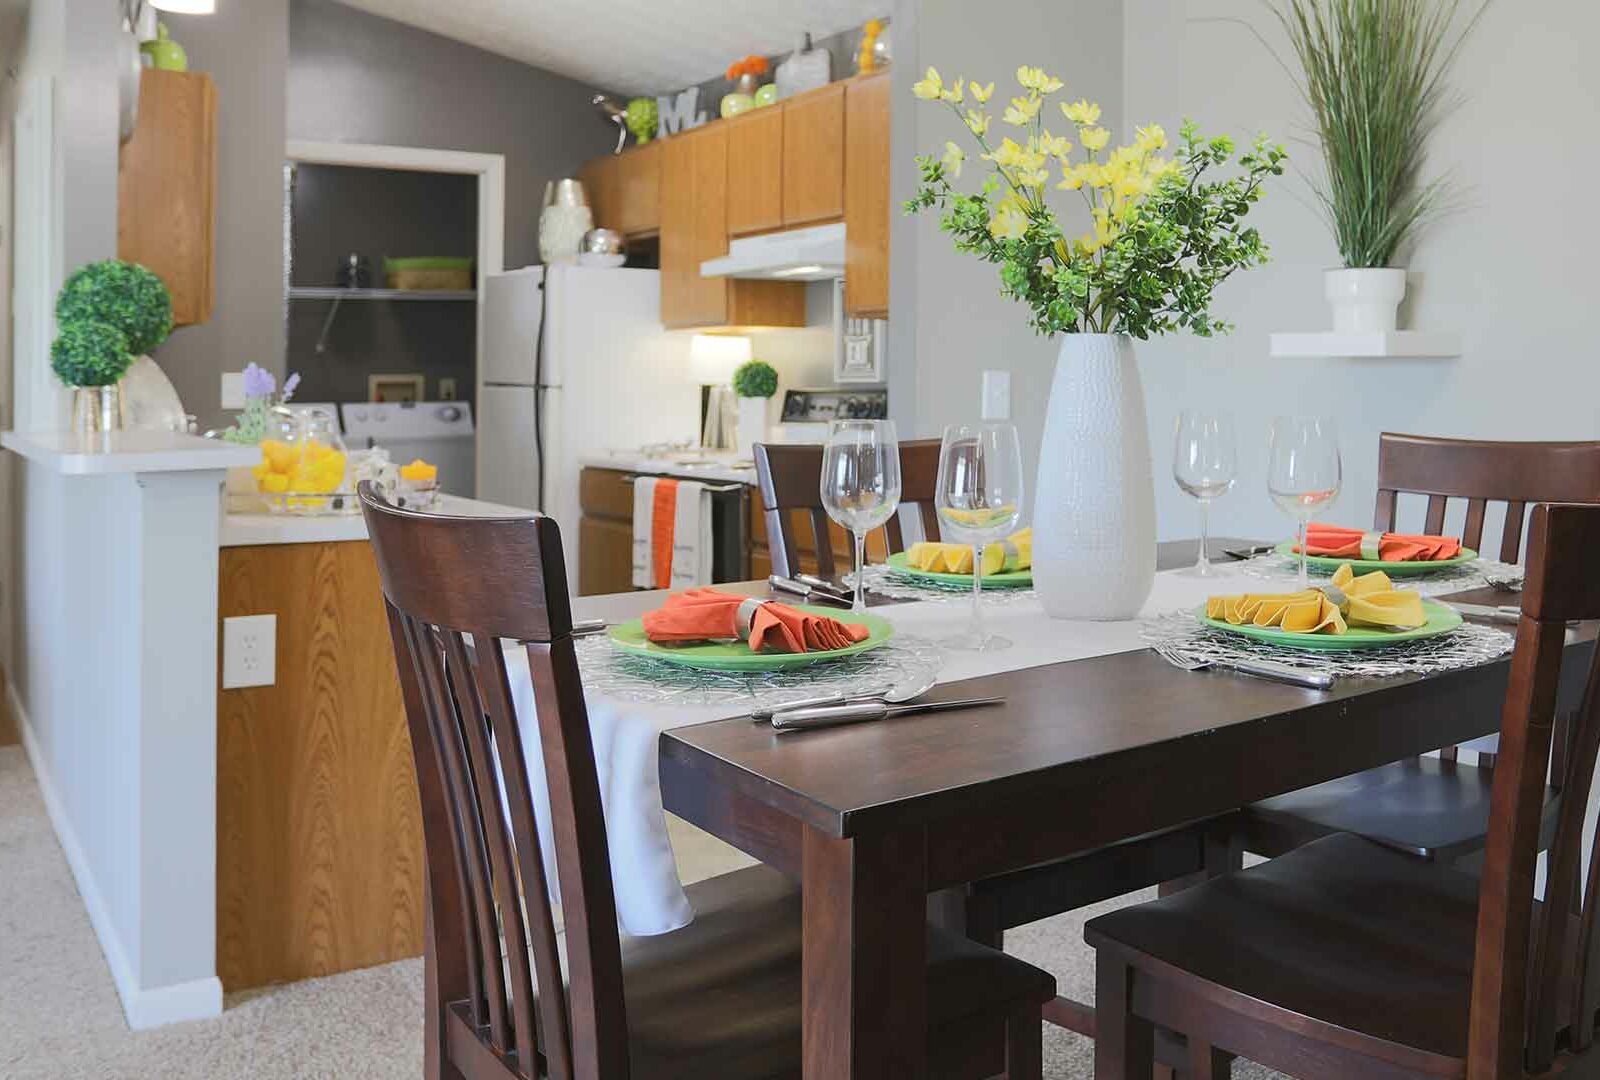 Decorated dining and kitchen space at Mallard Landing.